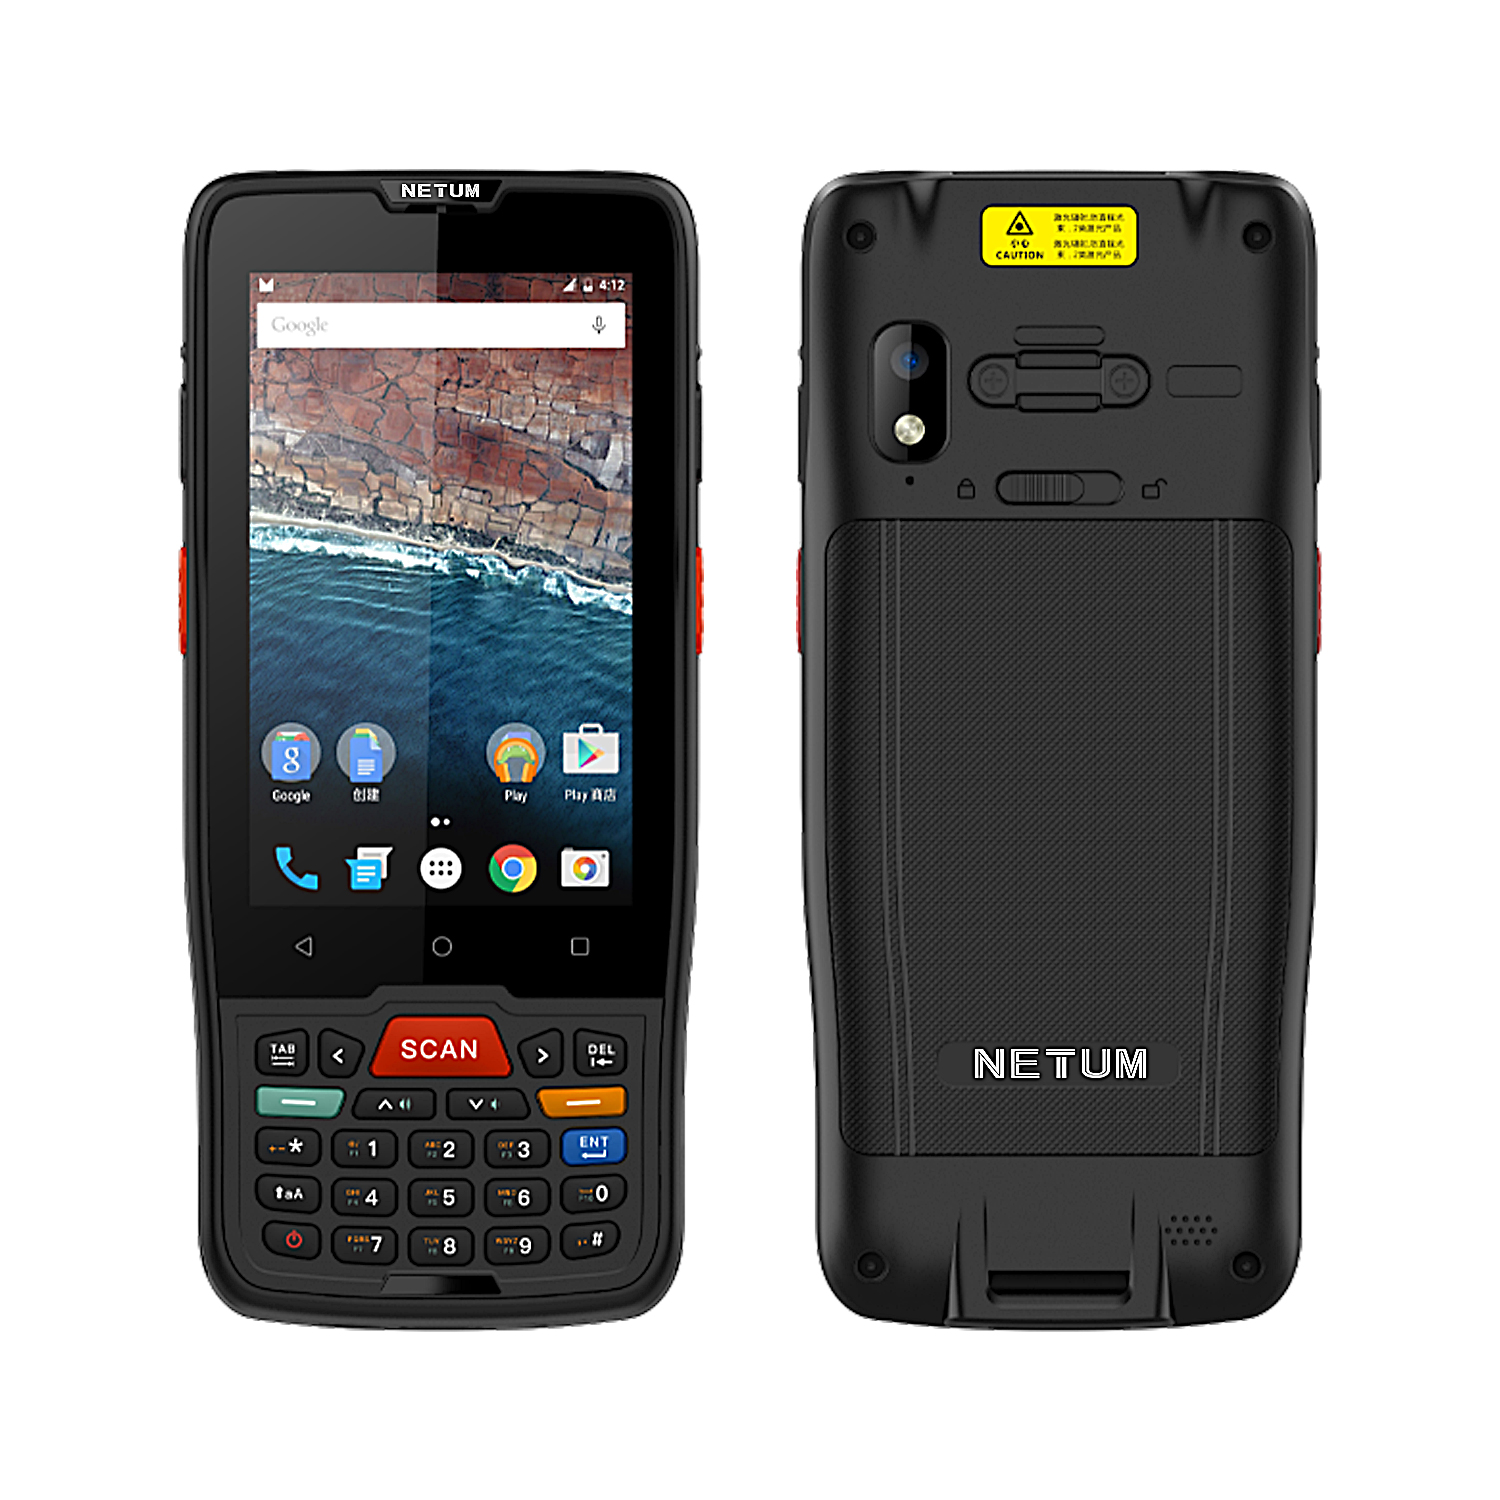 NETUM PDA-D7100, NT-M71 Terminale Android PDA Scanner di codici a barre 2D Dispositivo terminale Android con WIFI 4G GPS